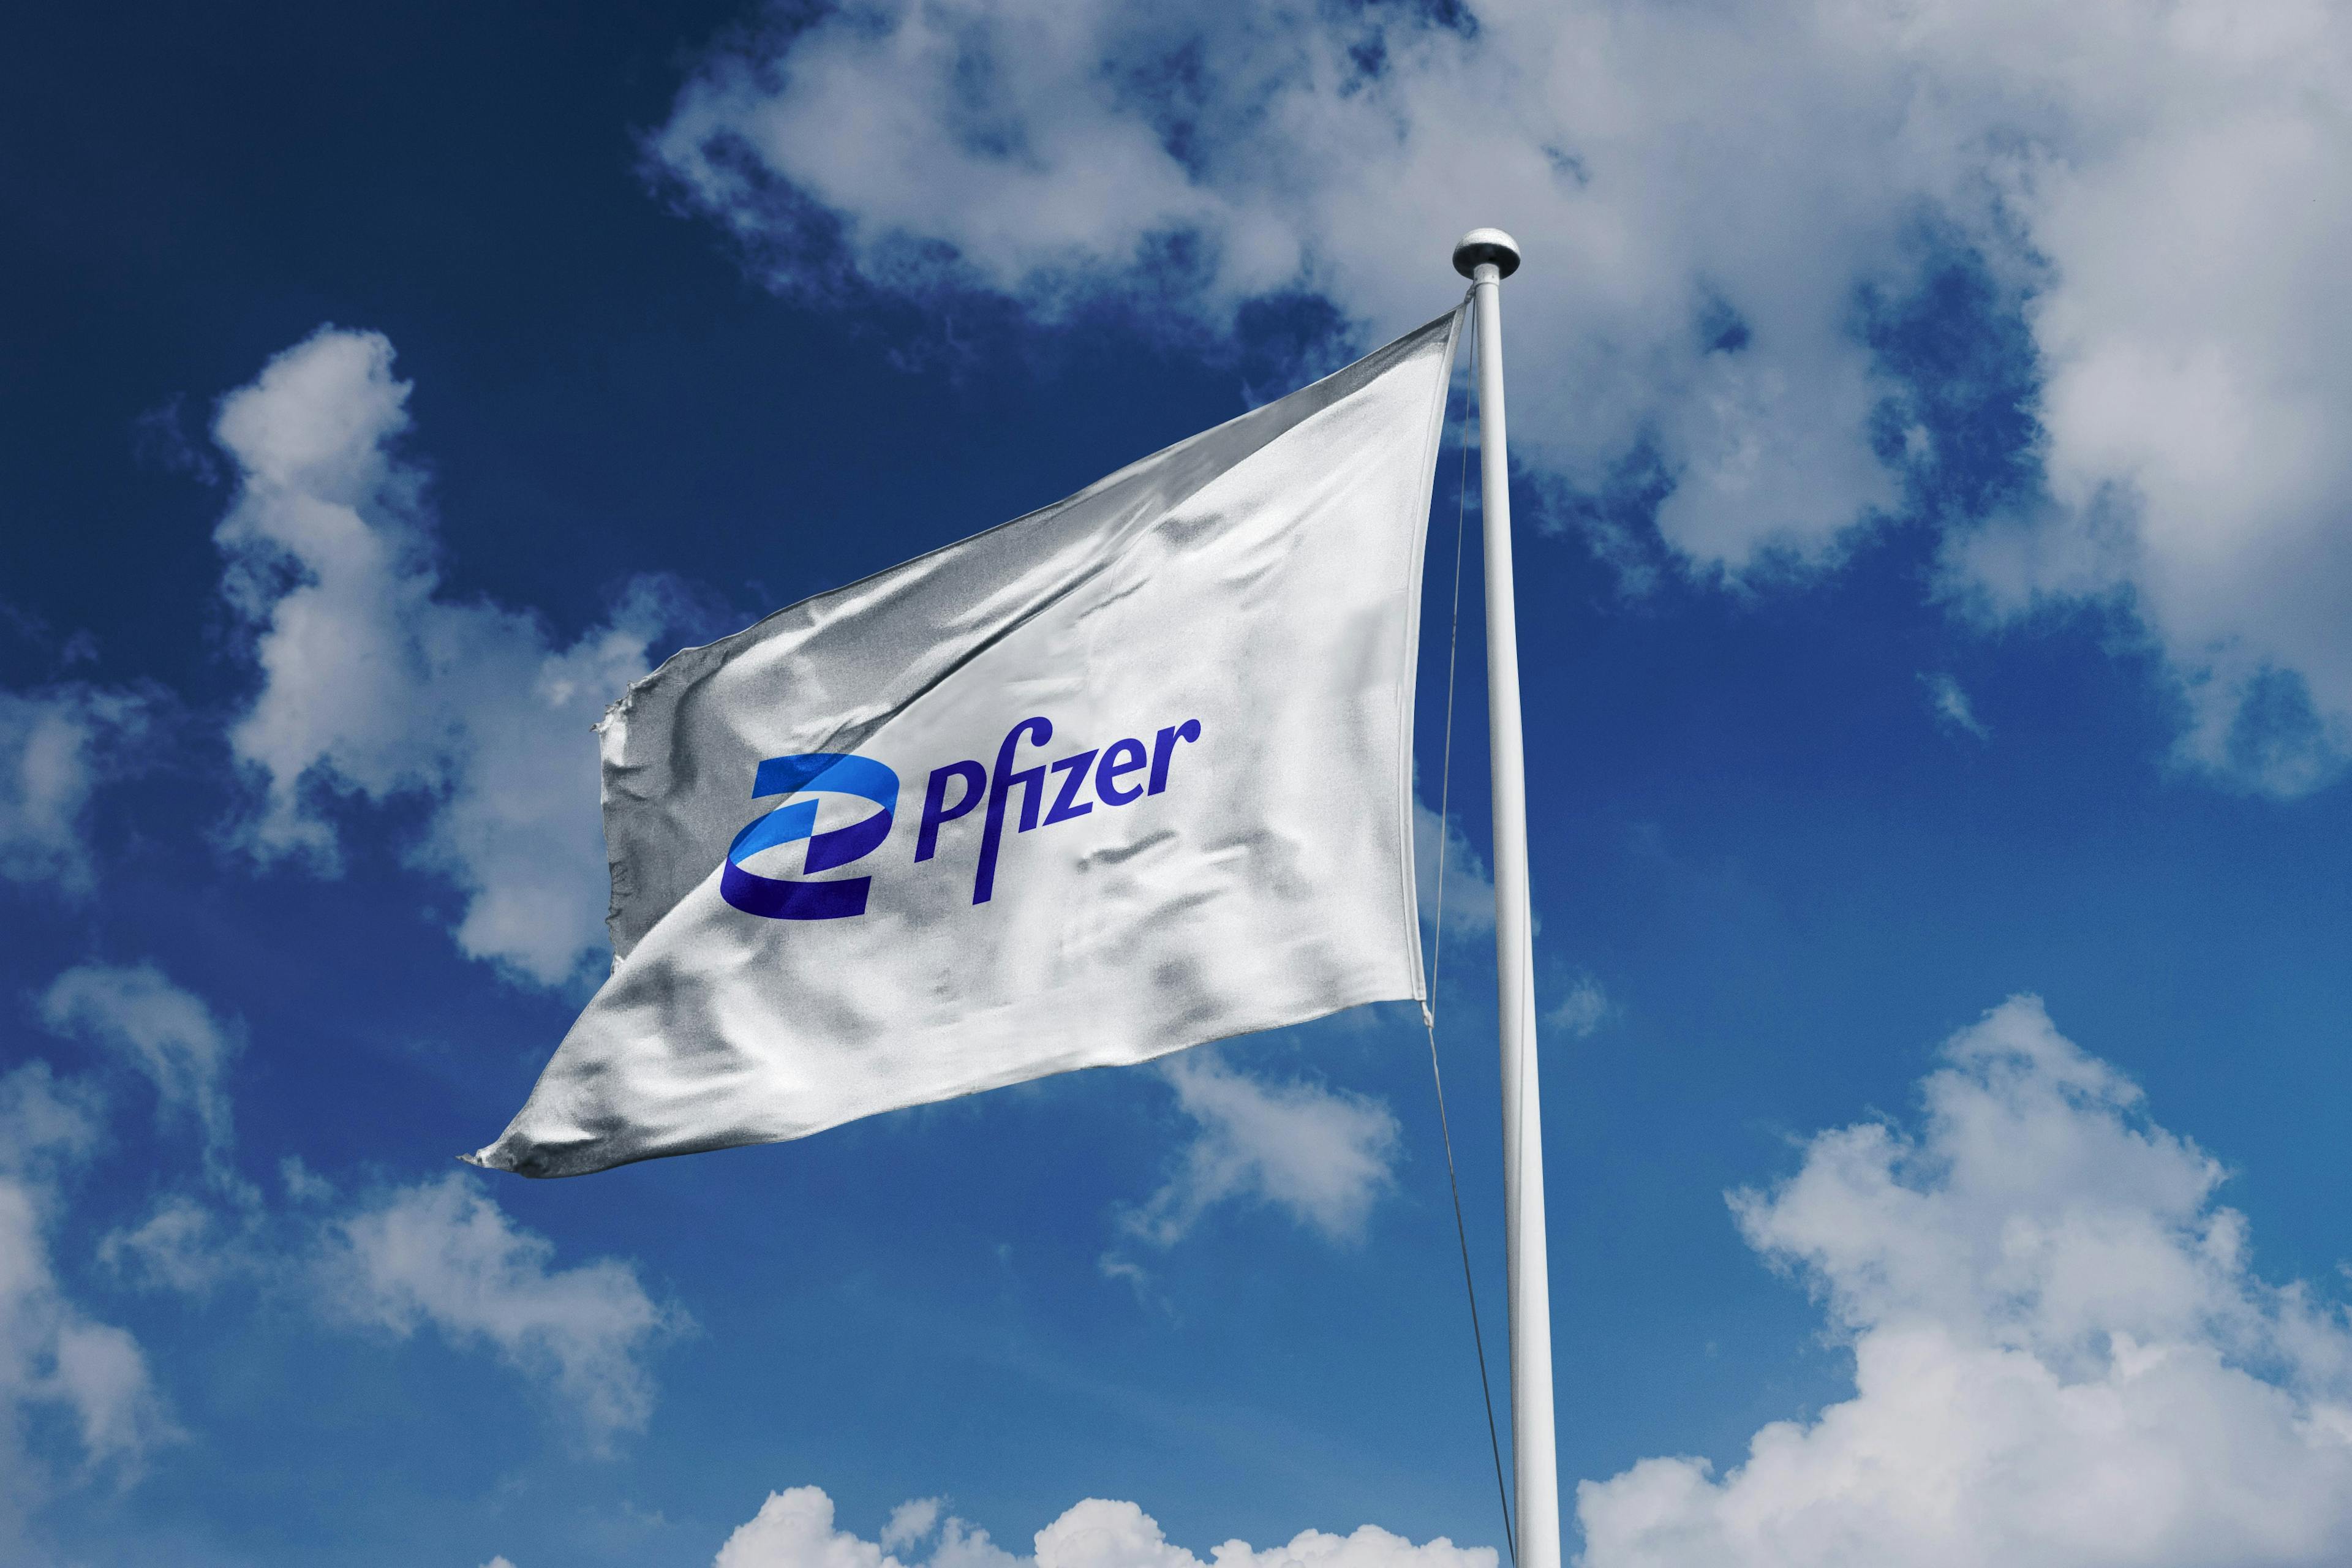 A white flag with Pfizer's name and logo in blue, flying against a blue sky